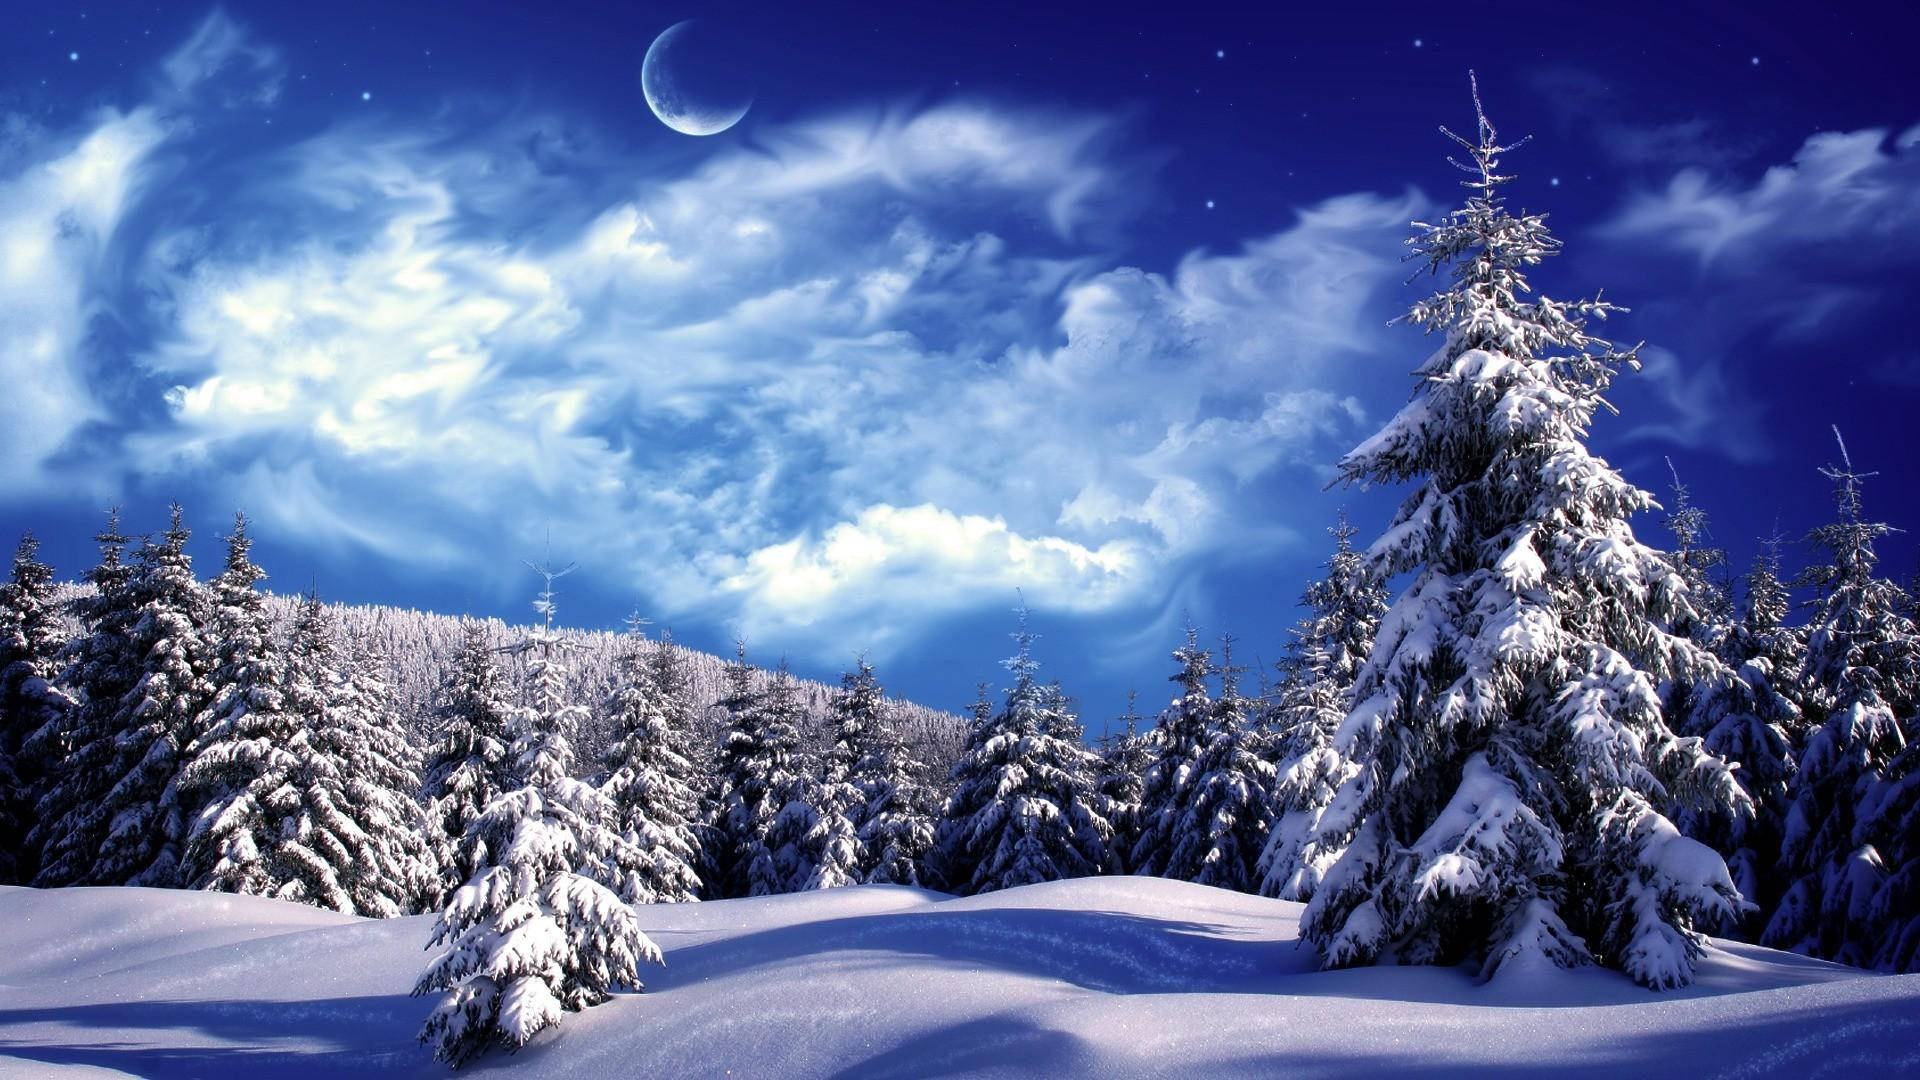 Windows Winter Pine Trees And Moon Background